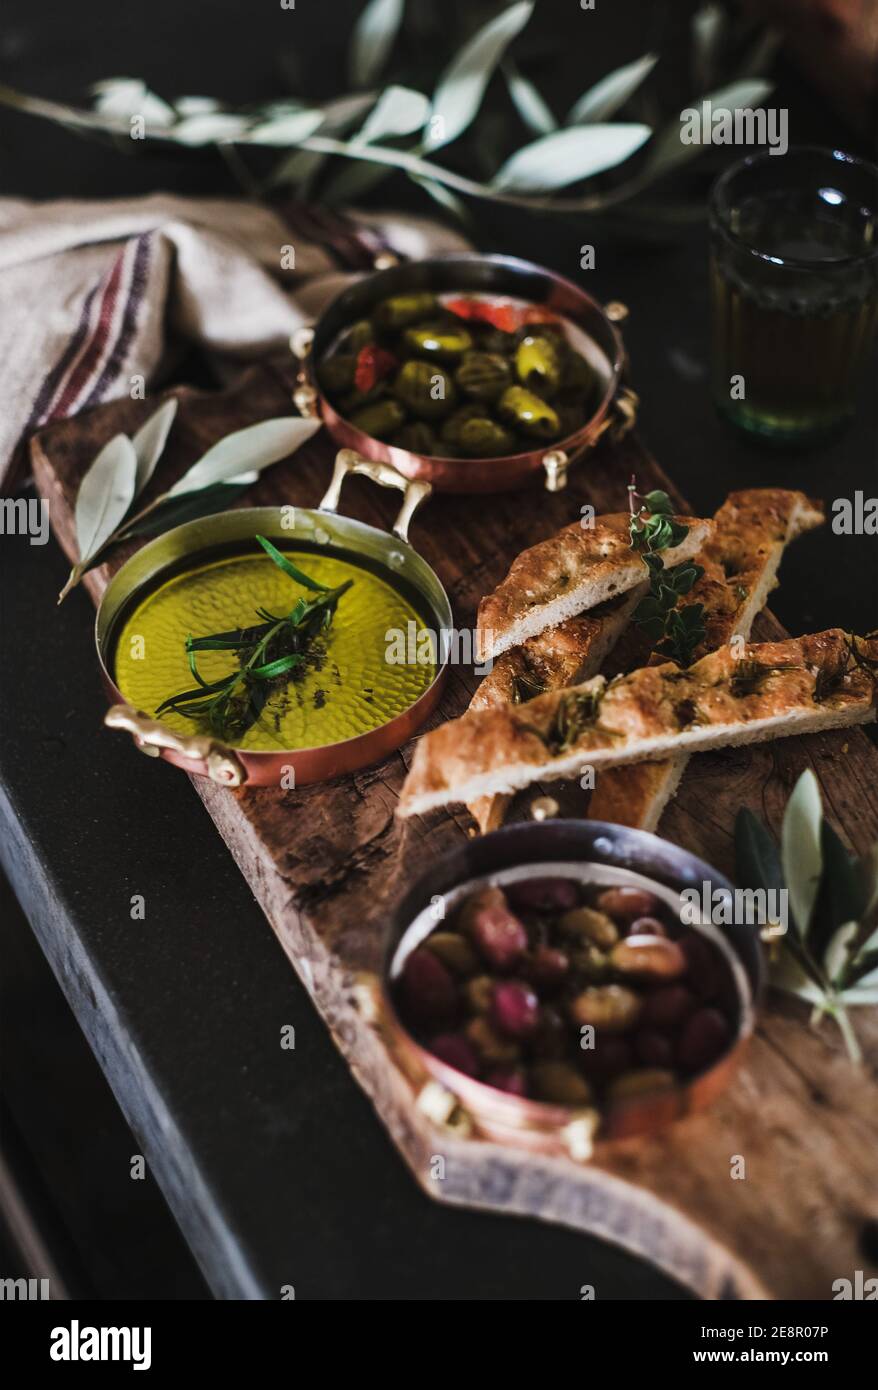 Pickled Greek olives, olive oil and herbed focaccia slices on rustic wooden board, selective focus. Traditional Mediterranean meze appetizers platter Stock Photo